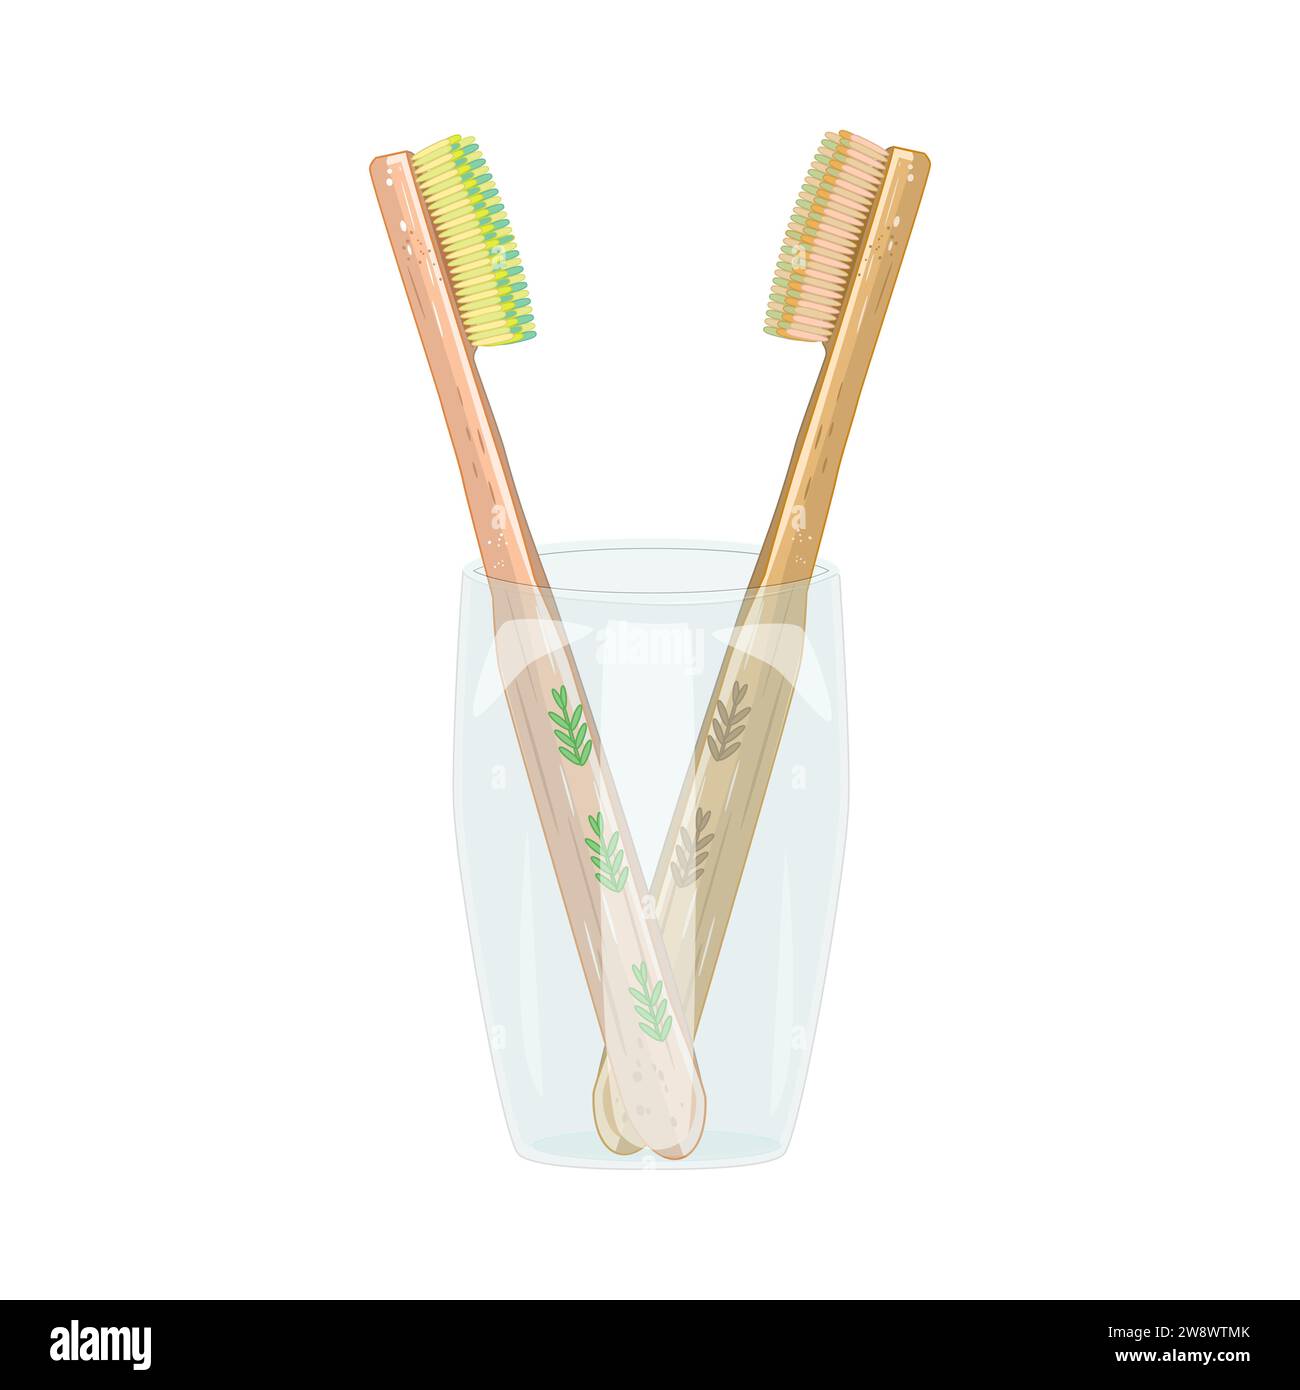 Toothbrushes in mug. Bamboo toothbrushes in glass. Oral hygiene and dental care item. Zero waste, reusable durable products, no plastic and eco living Stock Vector